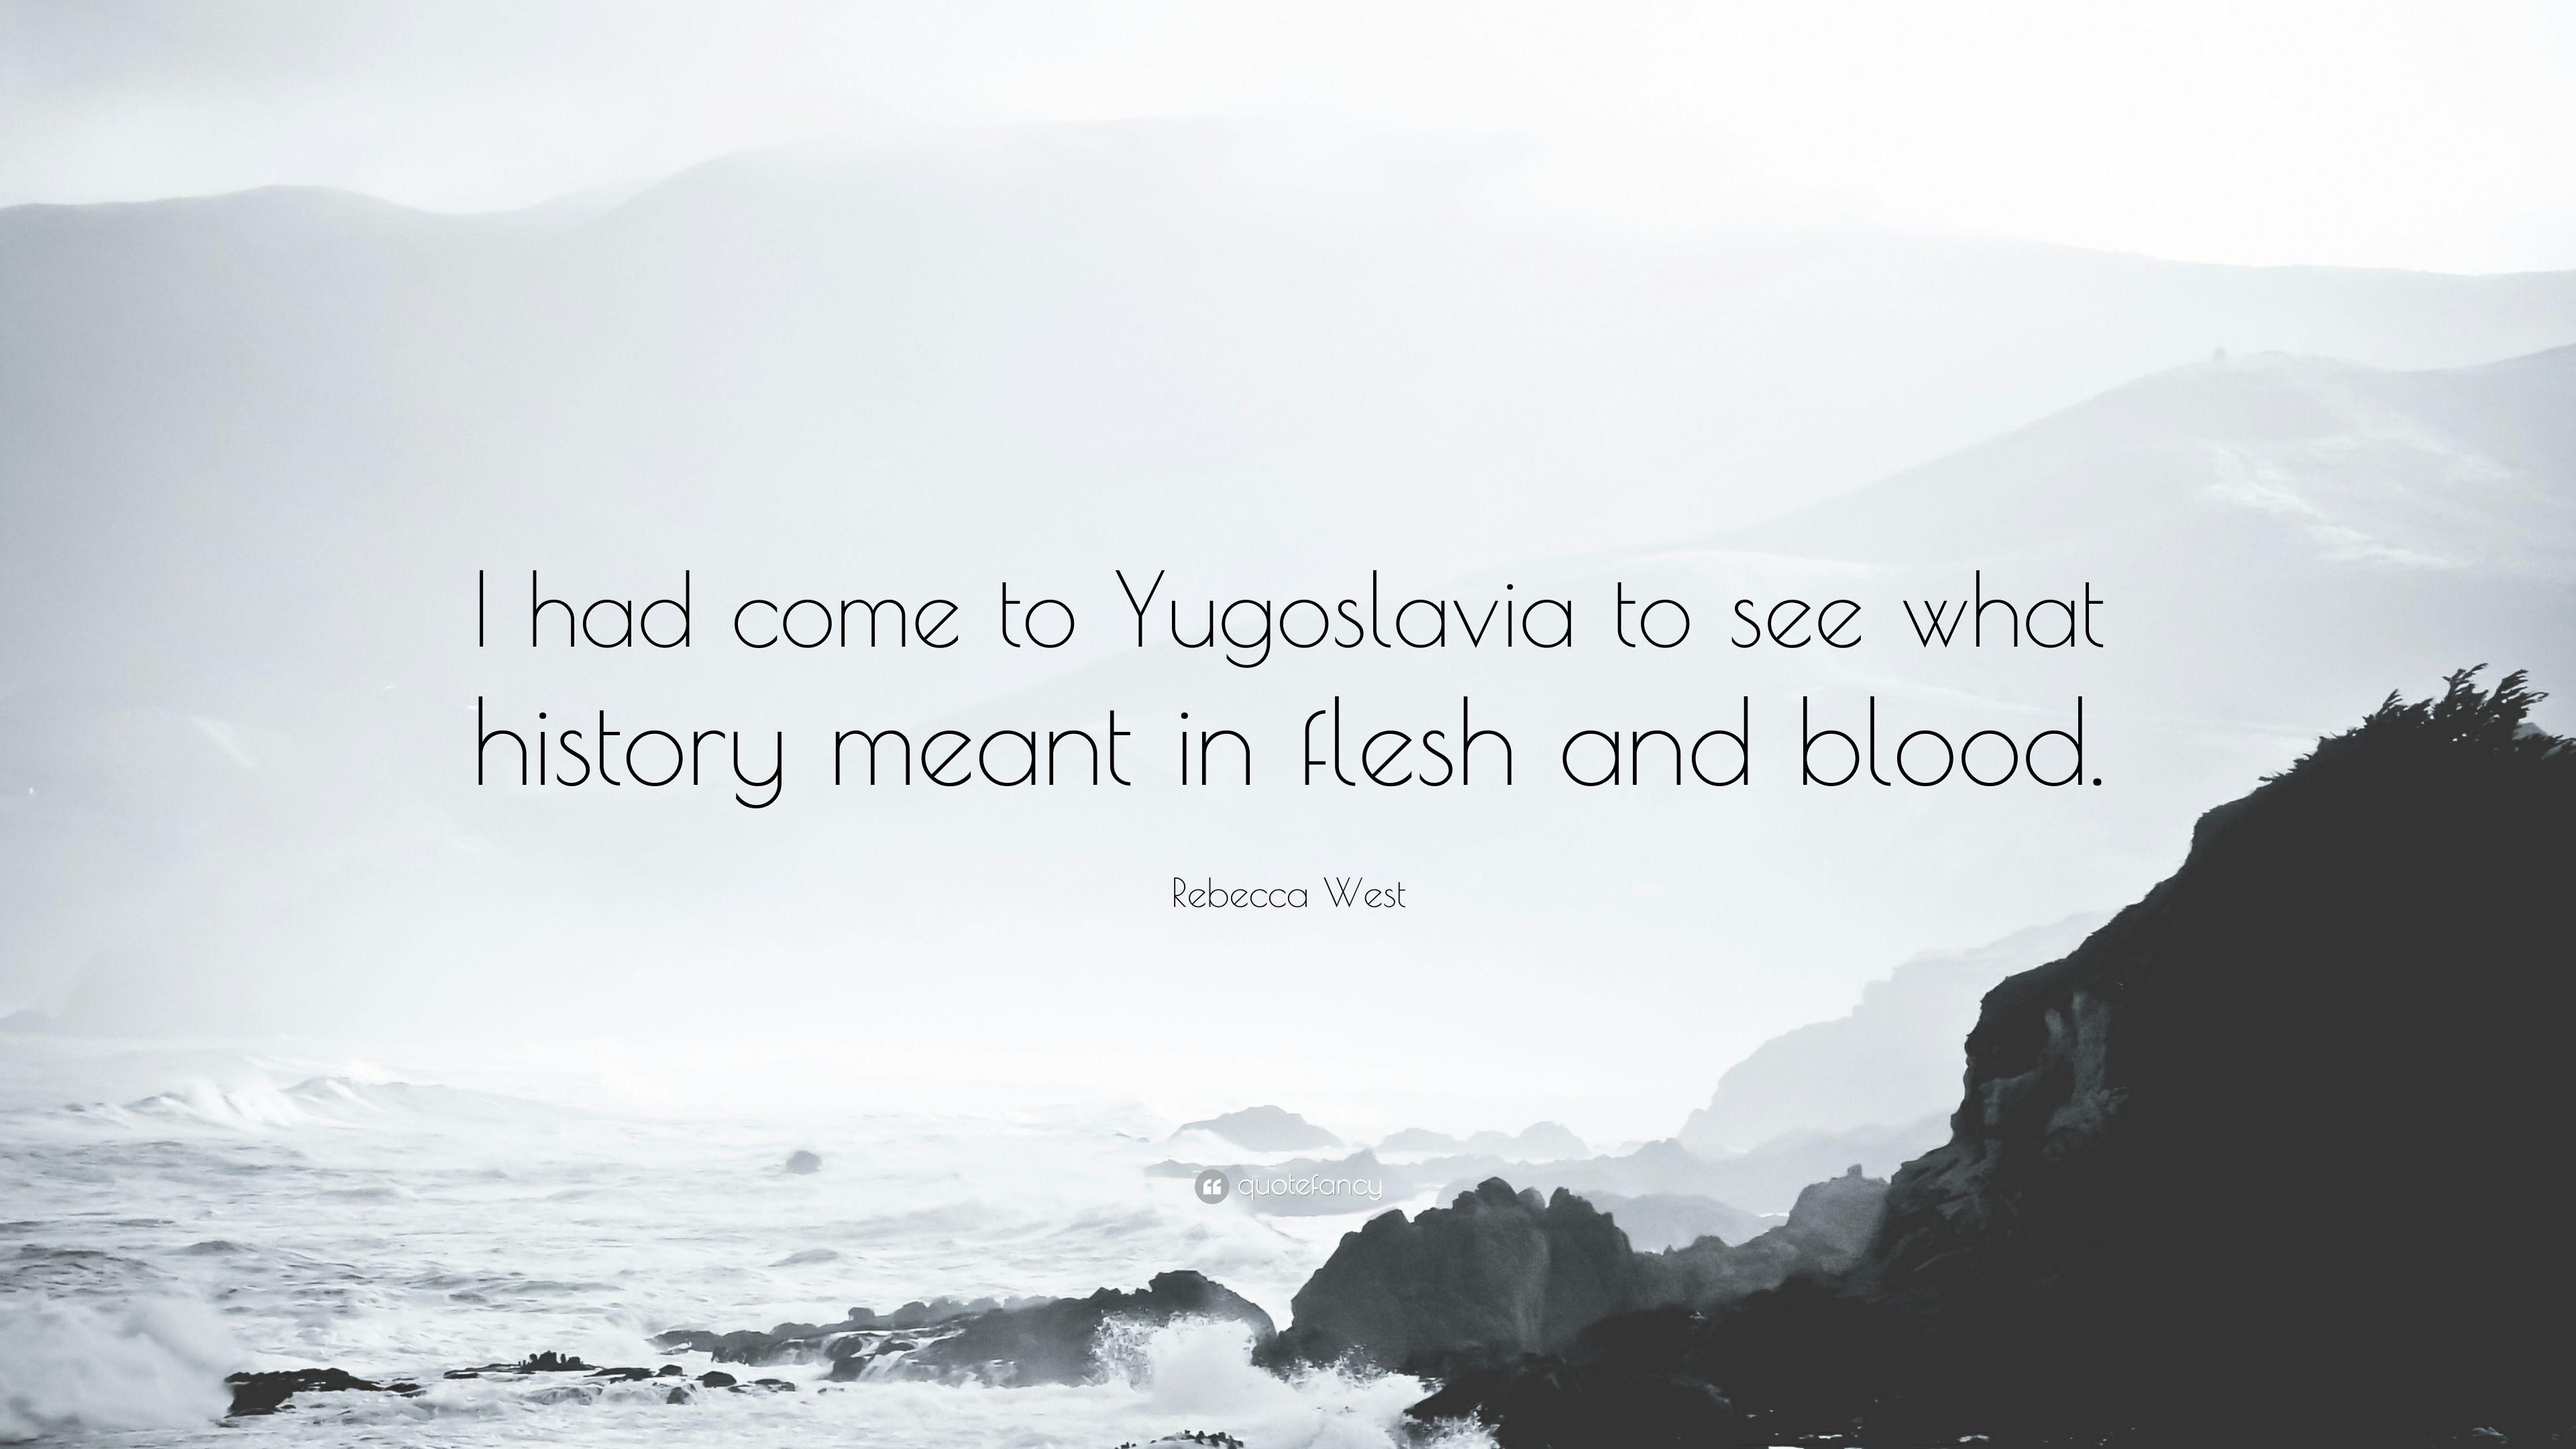 Rebecca West Quote: “I had come to Yugoslavia to see what history